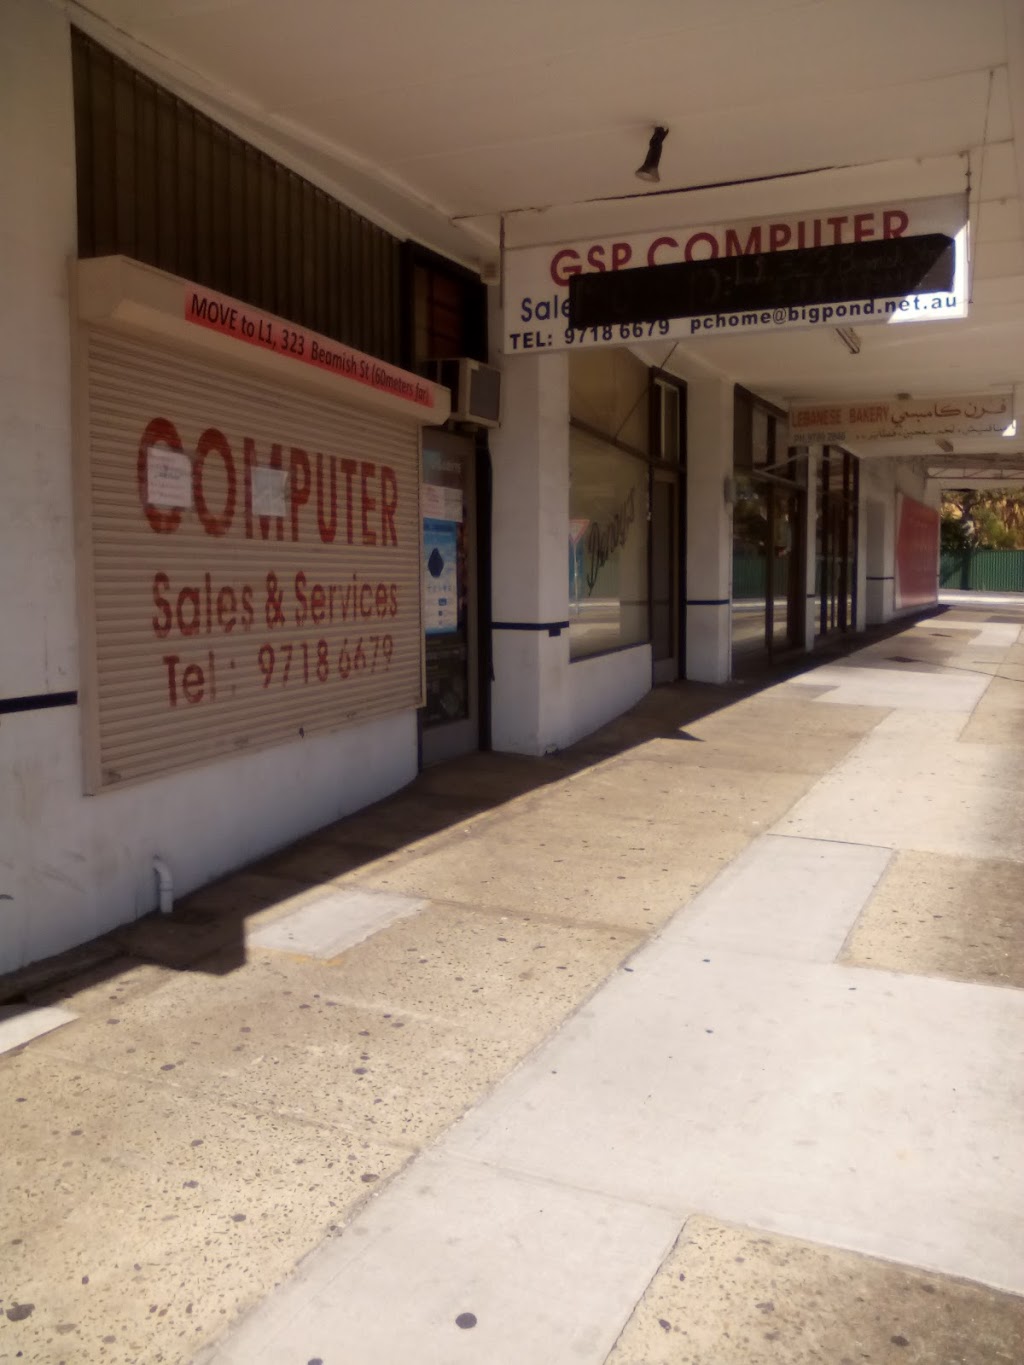 GSP Computers | electronics store | 323 Beamish St, Campsie NSW 2194, Australia | 0297186679 OR +61 2 9718 6679